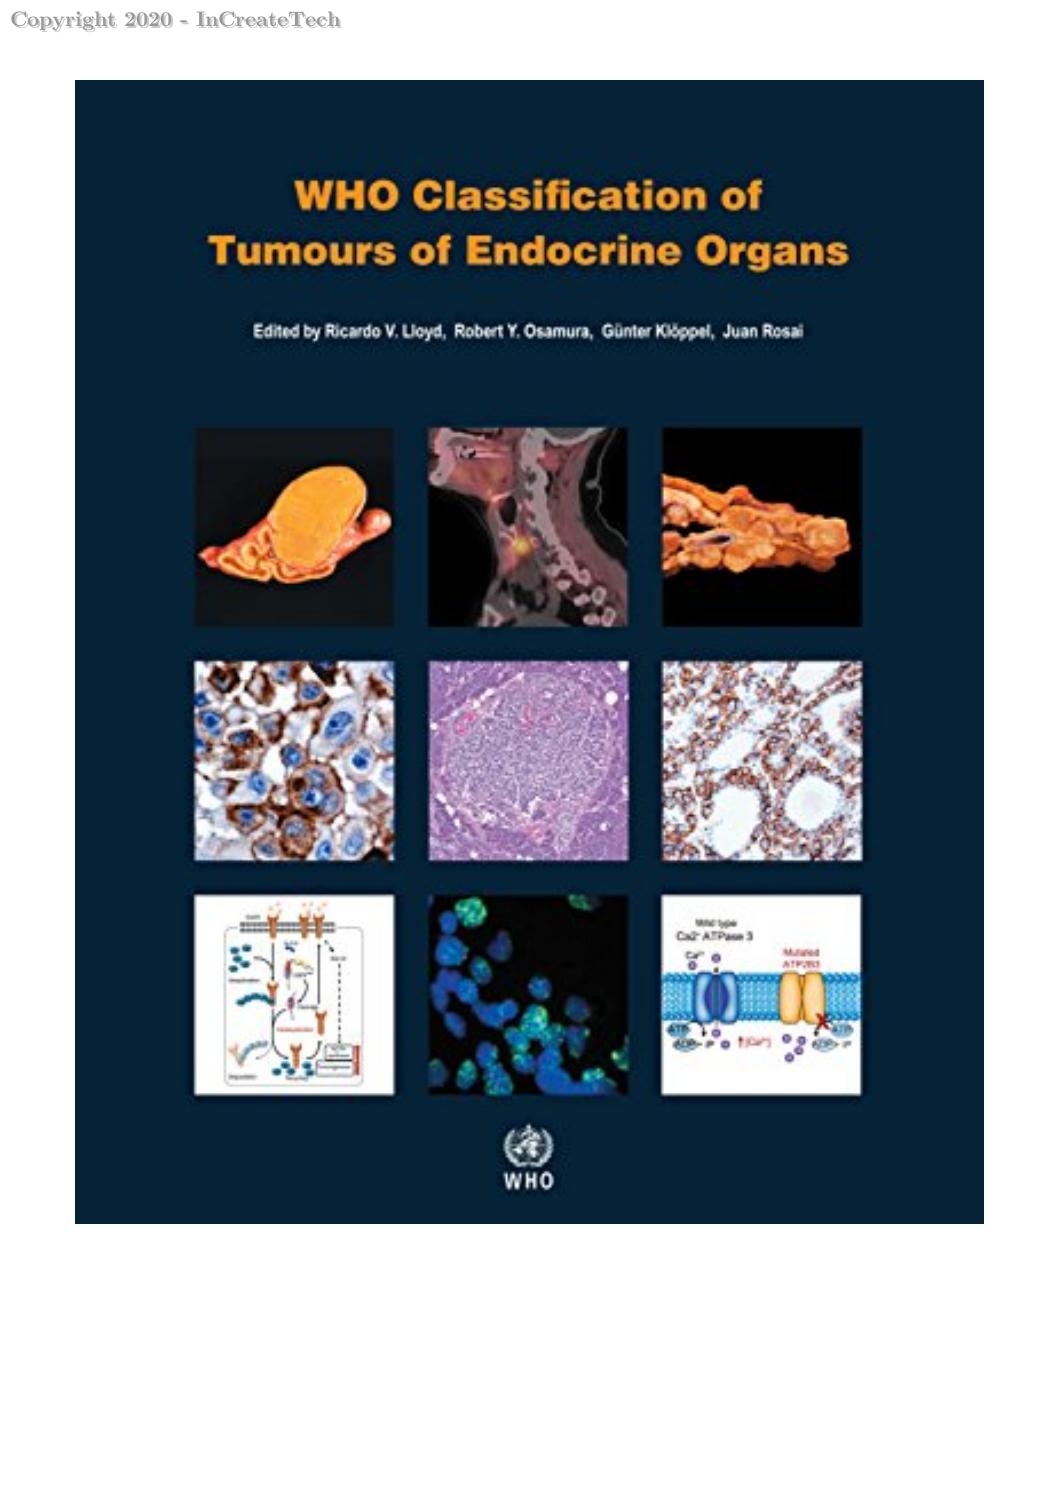 WHO Classification of Tumors of Endocrine Organs